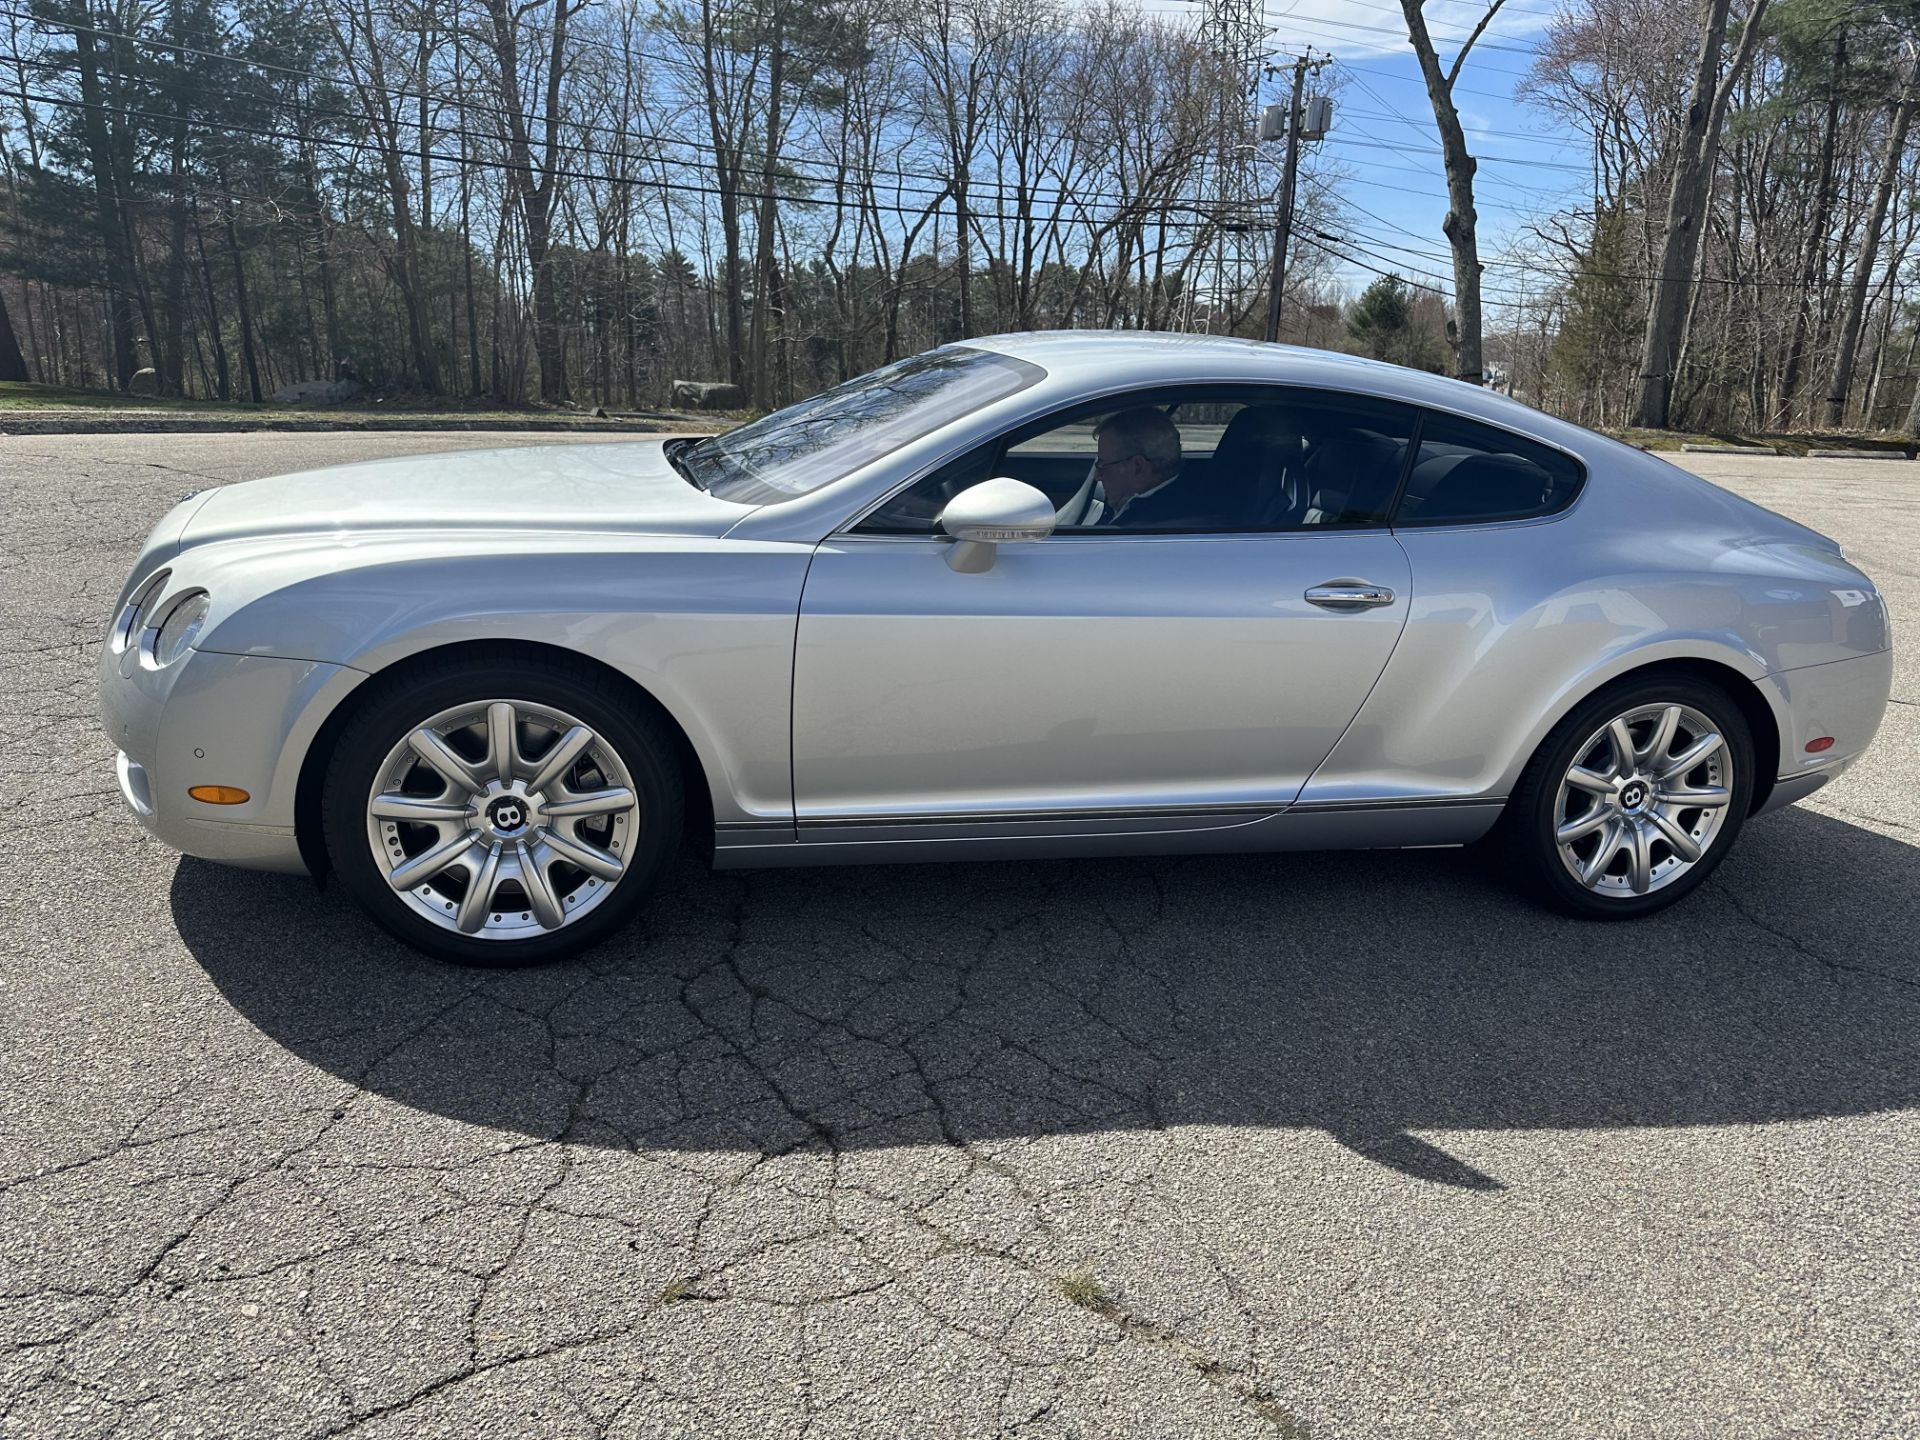 2005 Bentley Continental GT Coupe, Odom: 14,600, VIN#: SCBCR63W35C029782